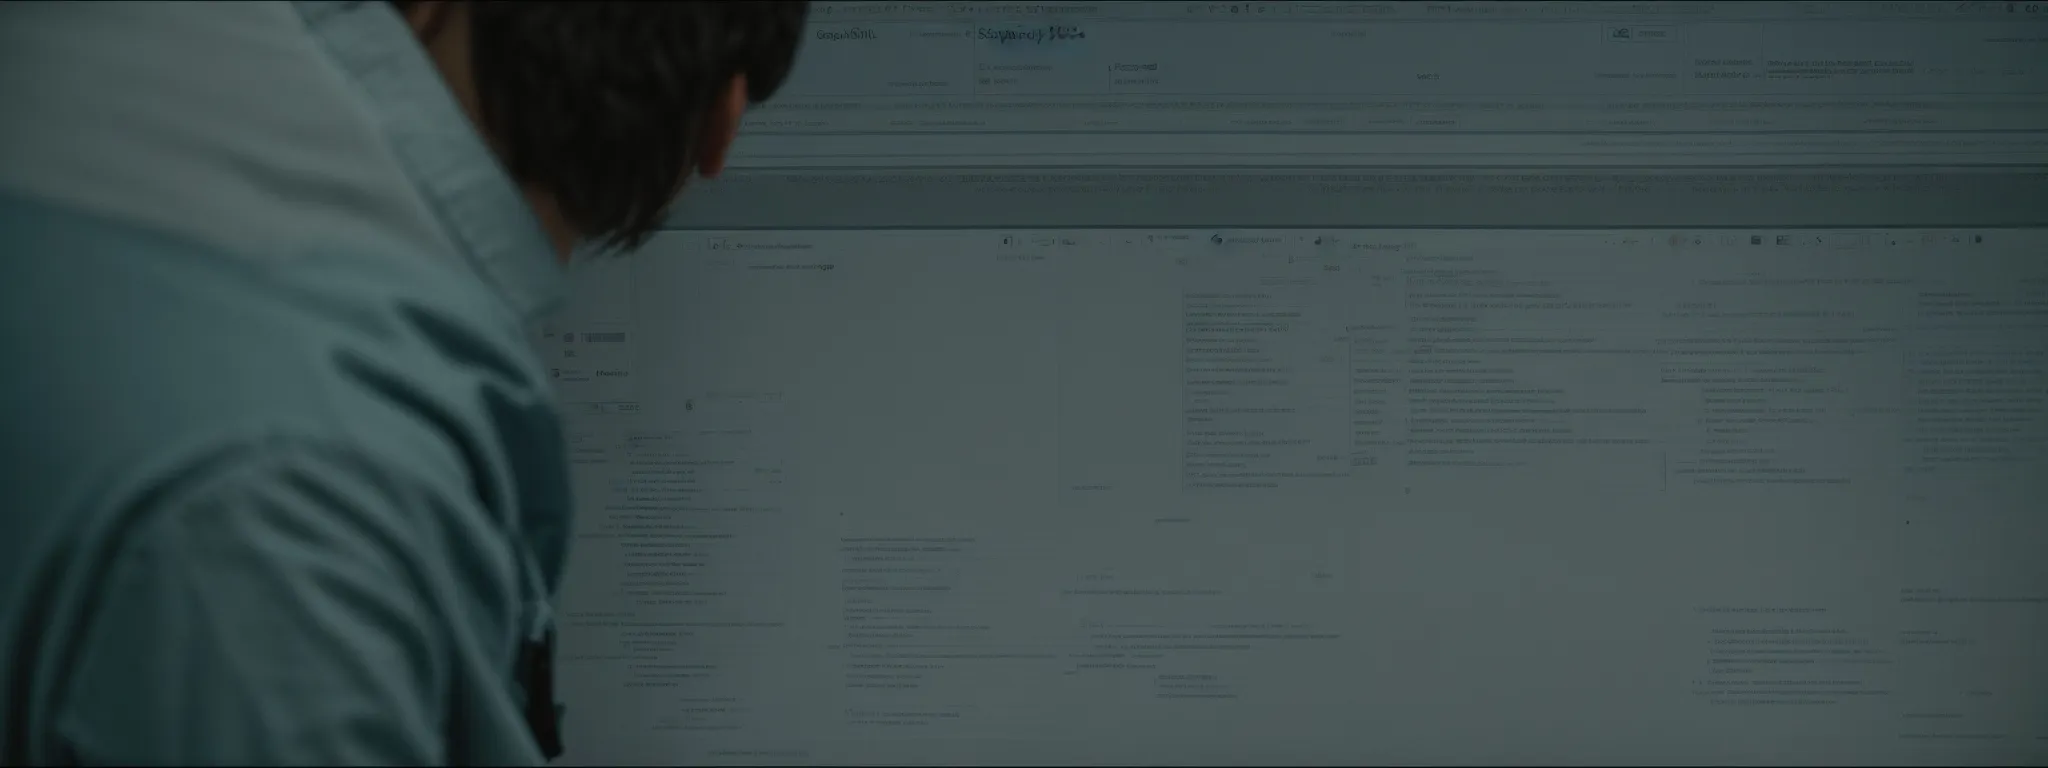 a person sitting at a computer reviewing a list of image file names on a screen.